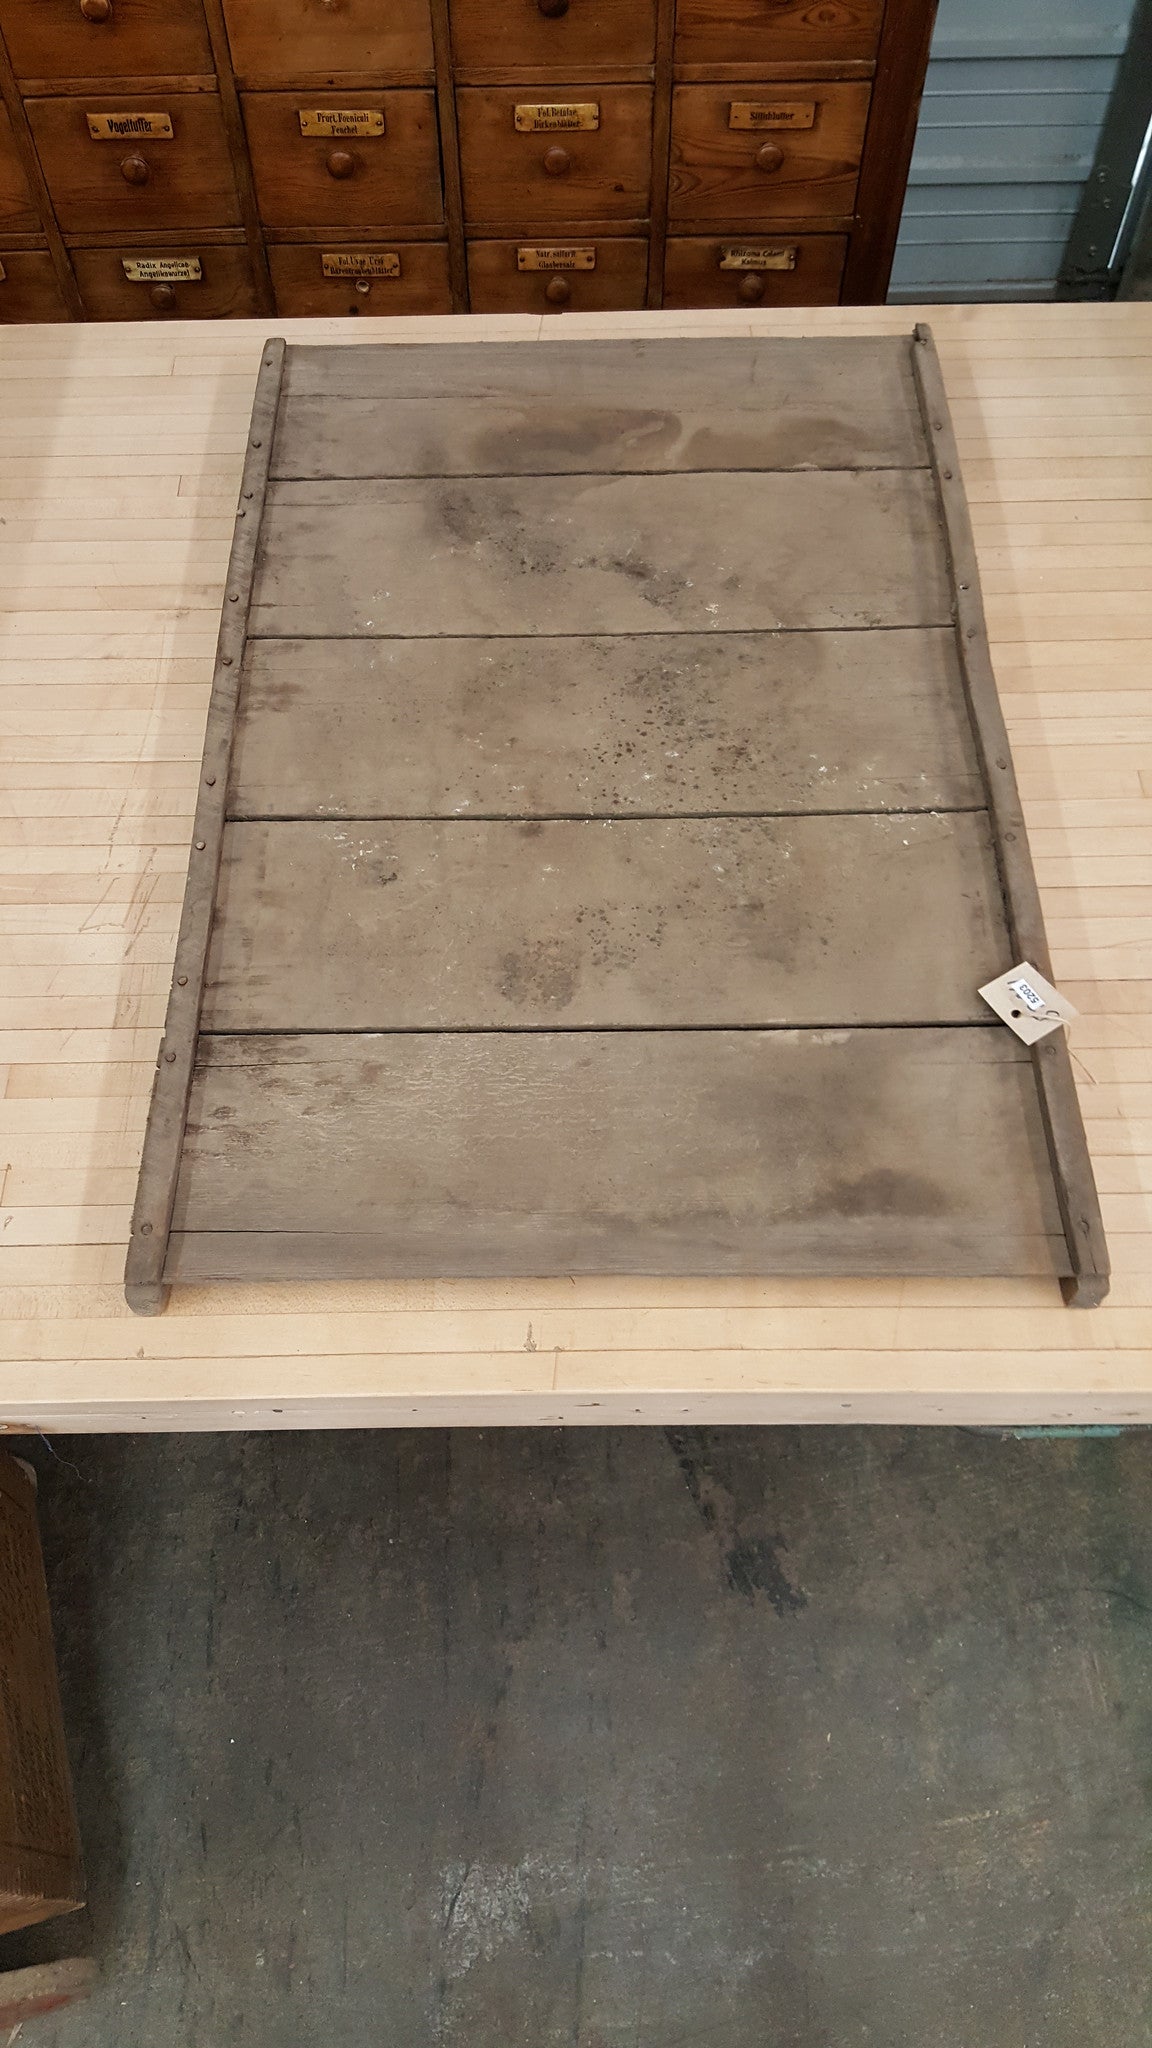 Apricot Drying Tray